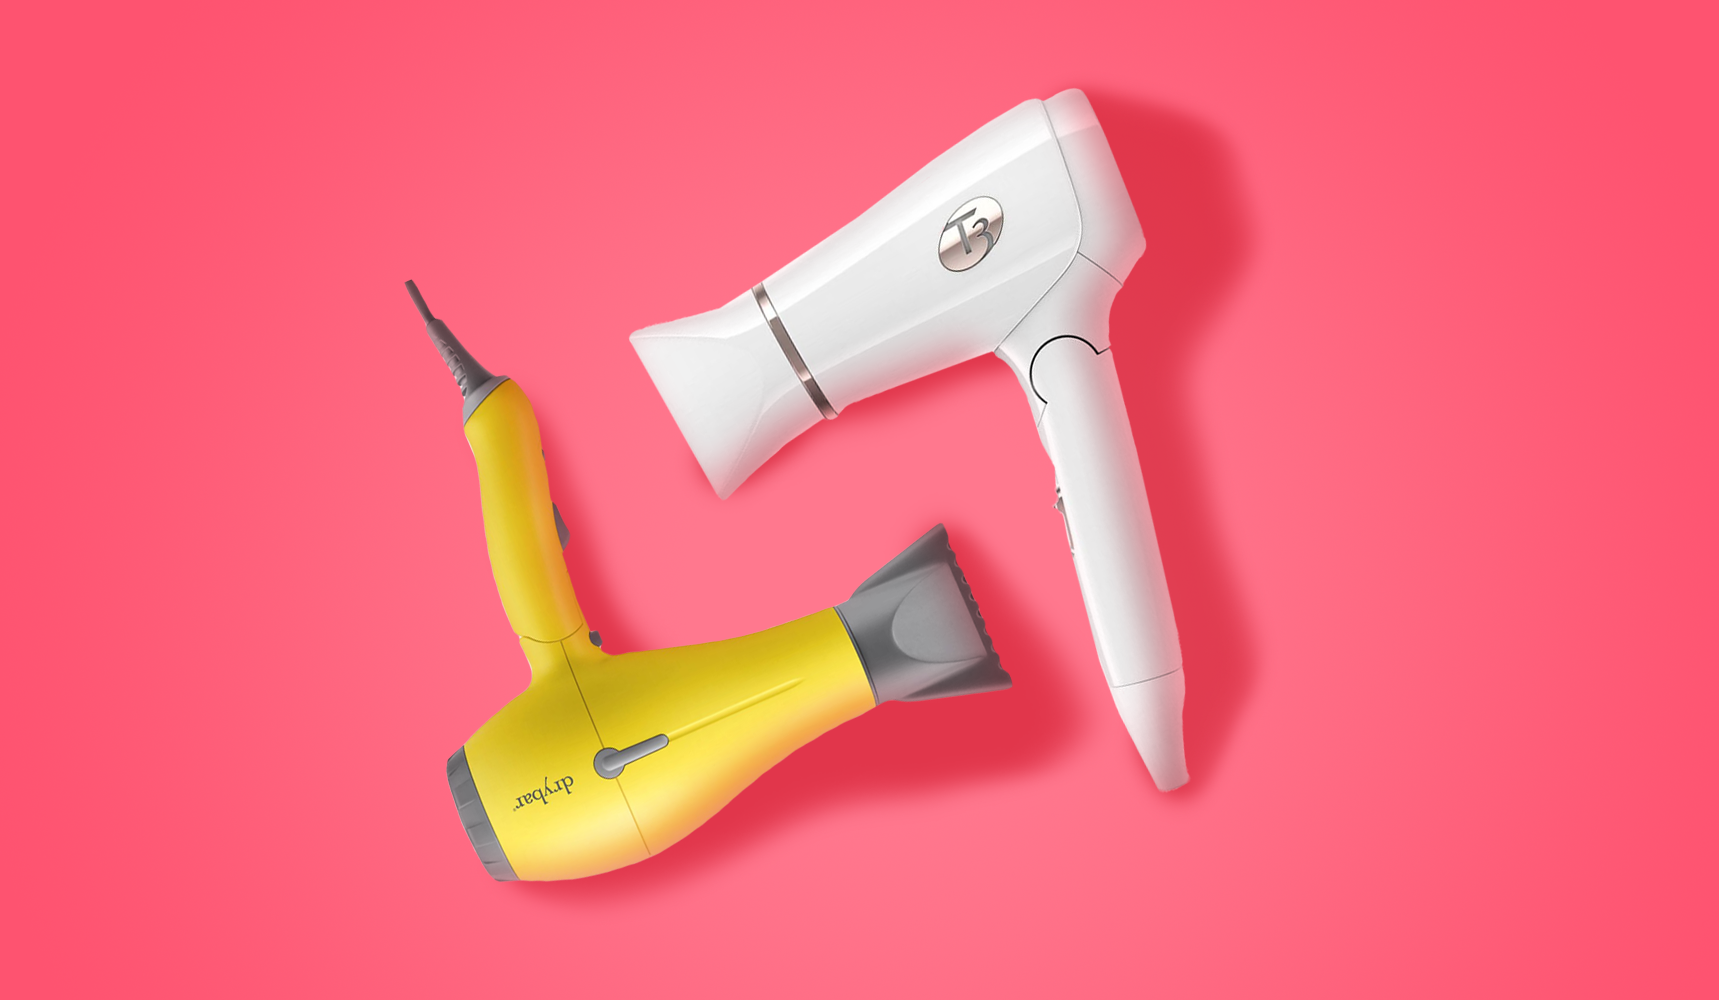 What is the most powerful hair dryer on the market 7 Best Travel Hair Dryers To Buy In 2021 Best Lightweight And Dual Voltage Hair Dryers